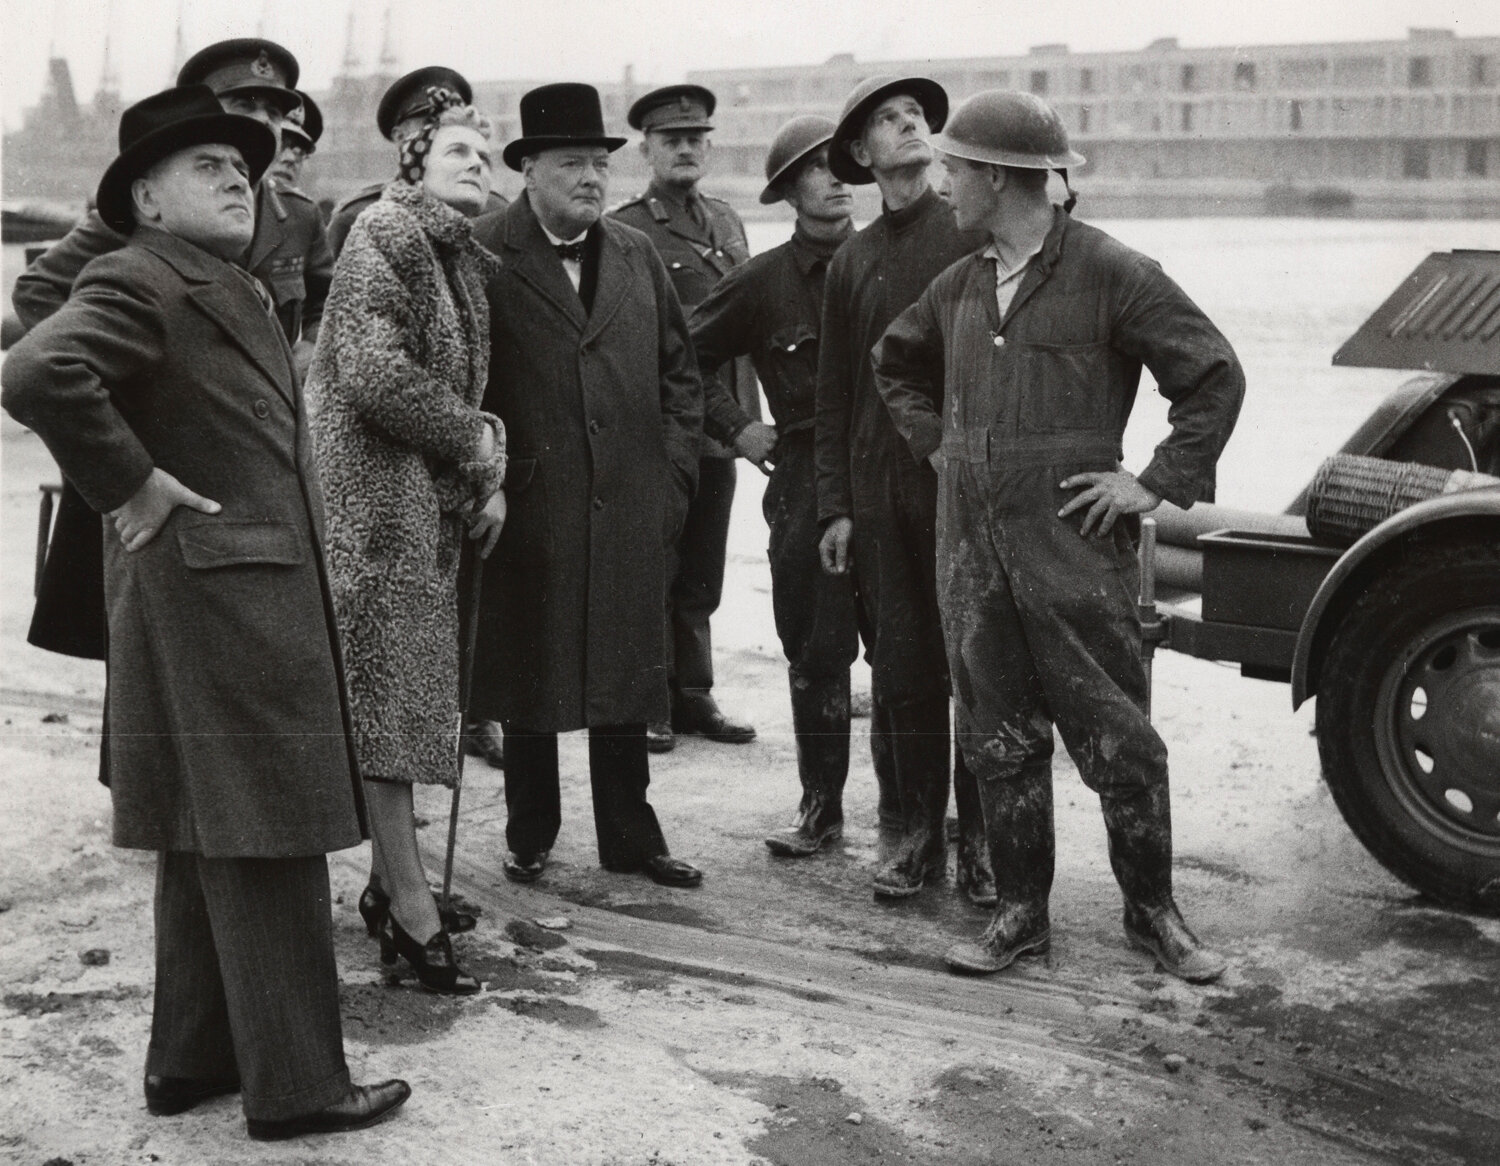 The Prime Minister and Mrs Churchill with a group of auxiliary firemen, touring London's dock in September 1940